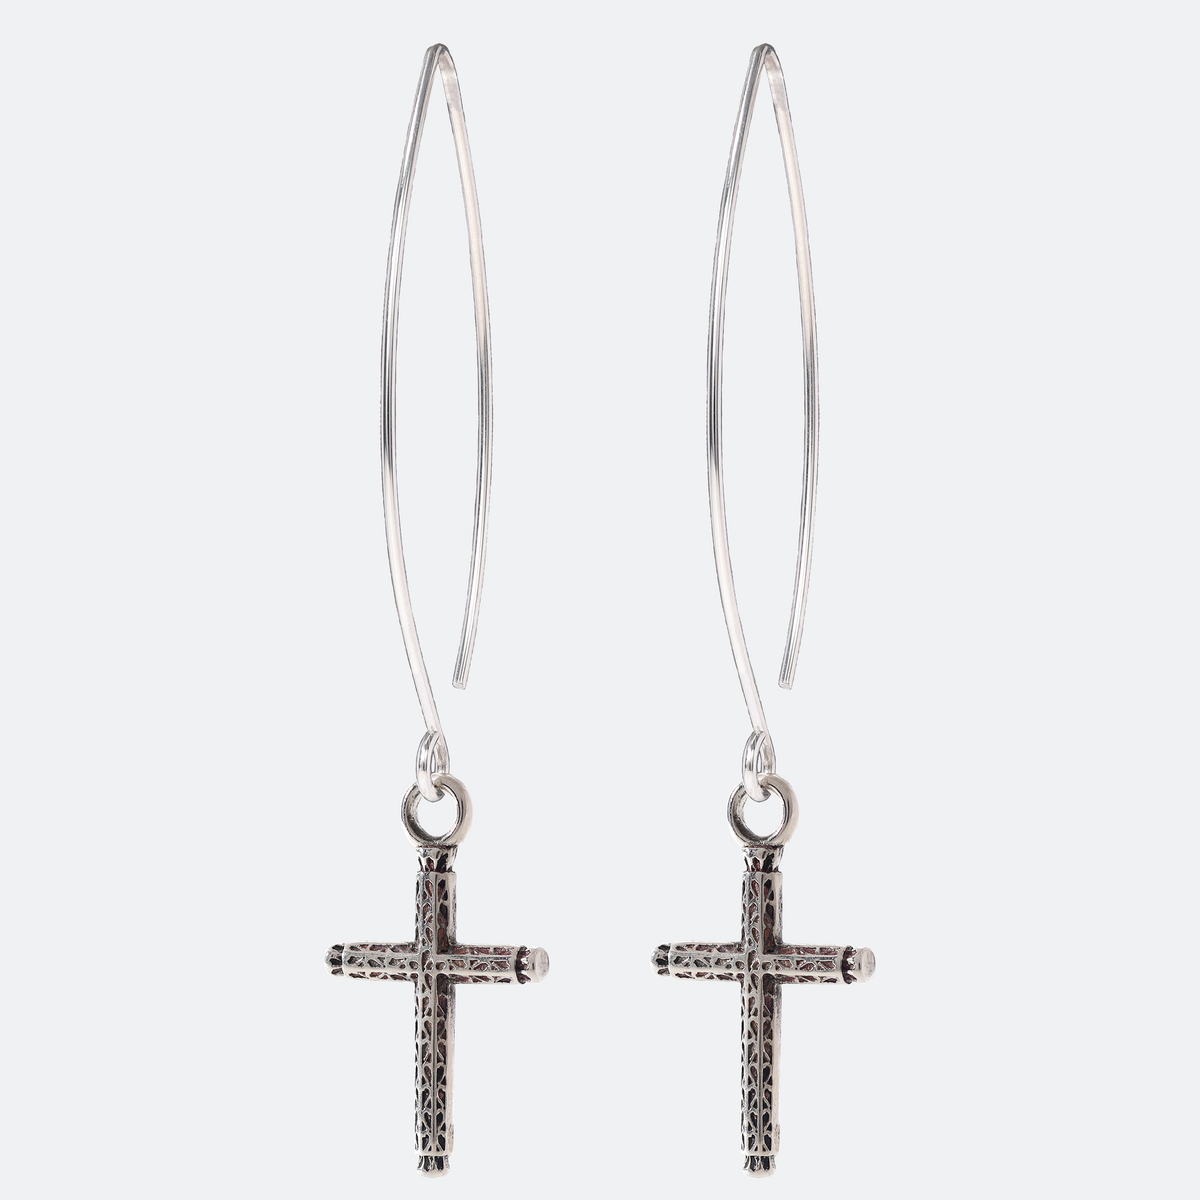 Small Sterling Silver Tlaquepaque Cross Tlaquepaque Cross Earrings on Long Ear Wires